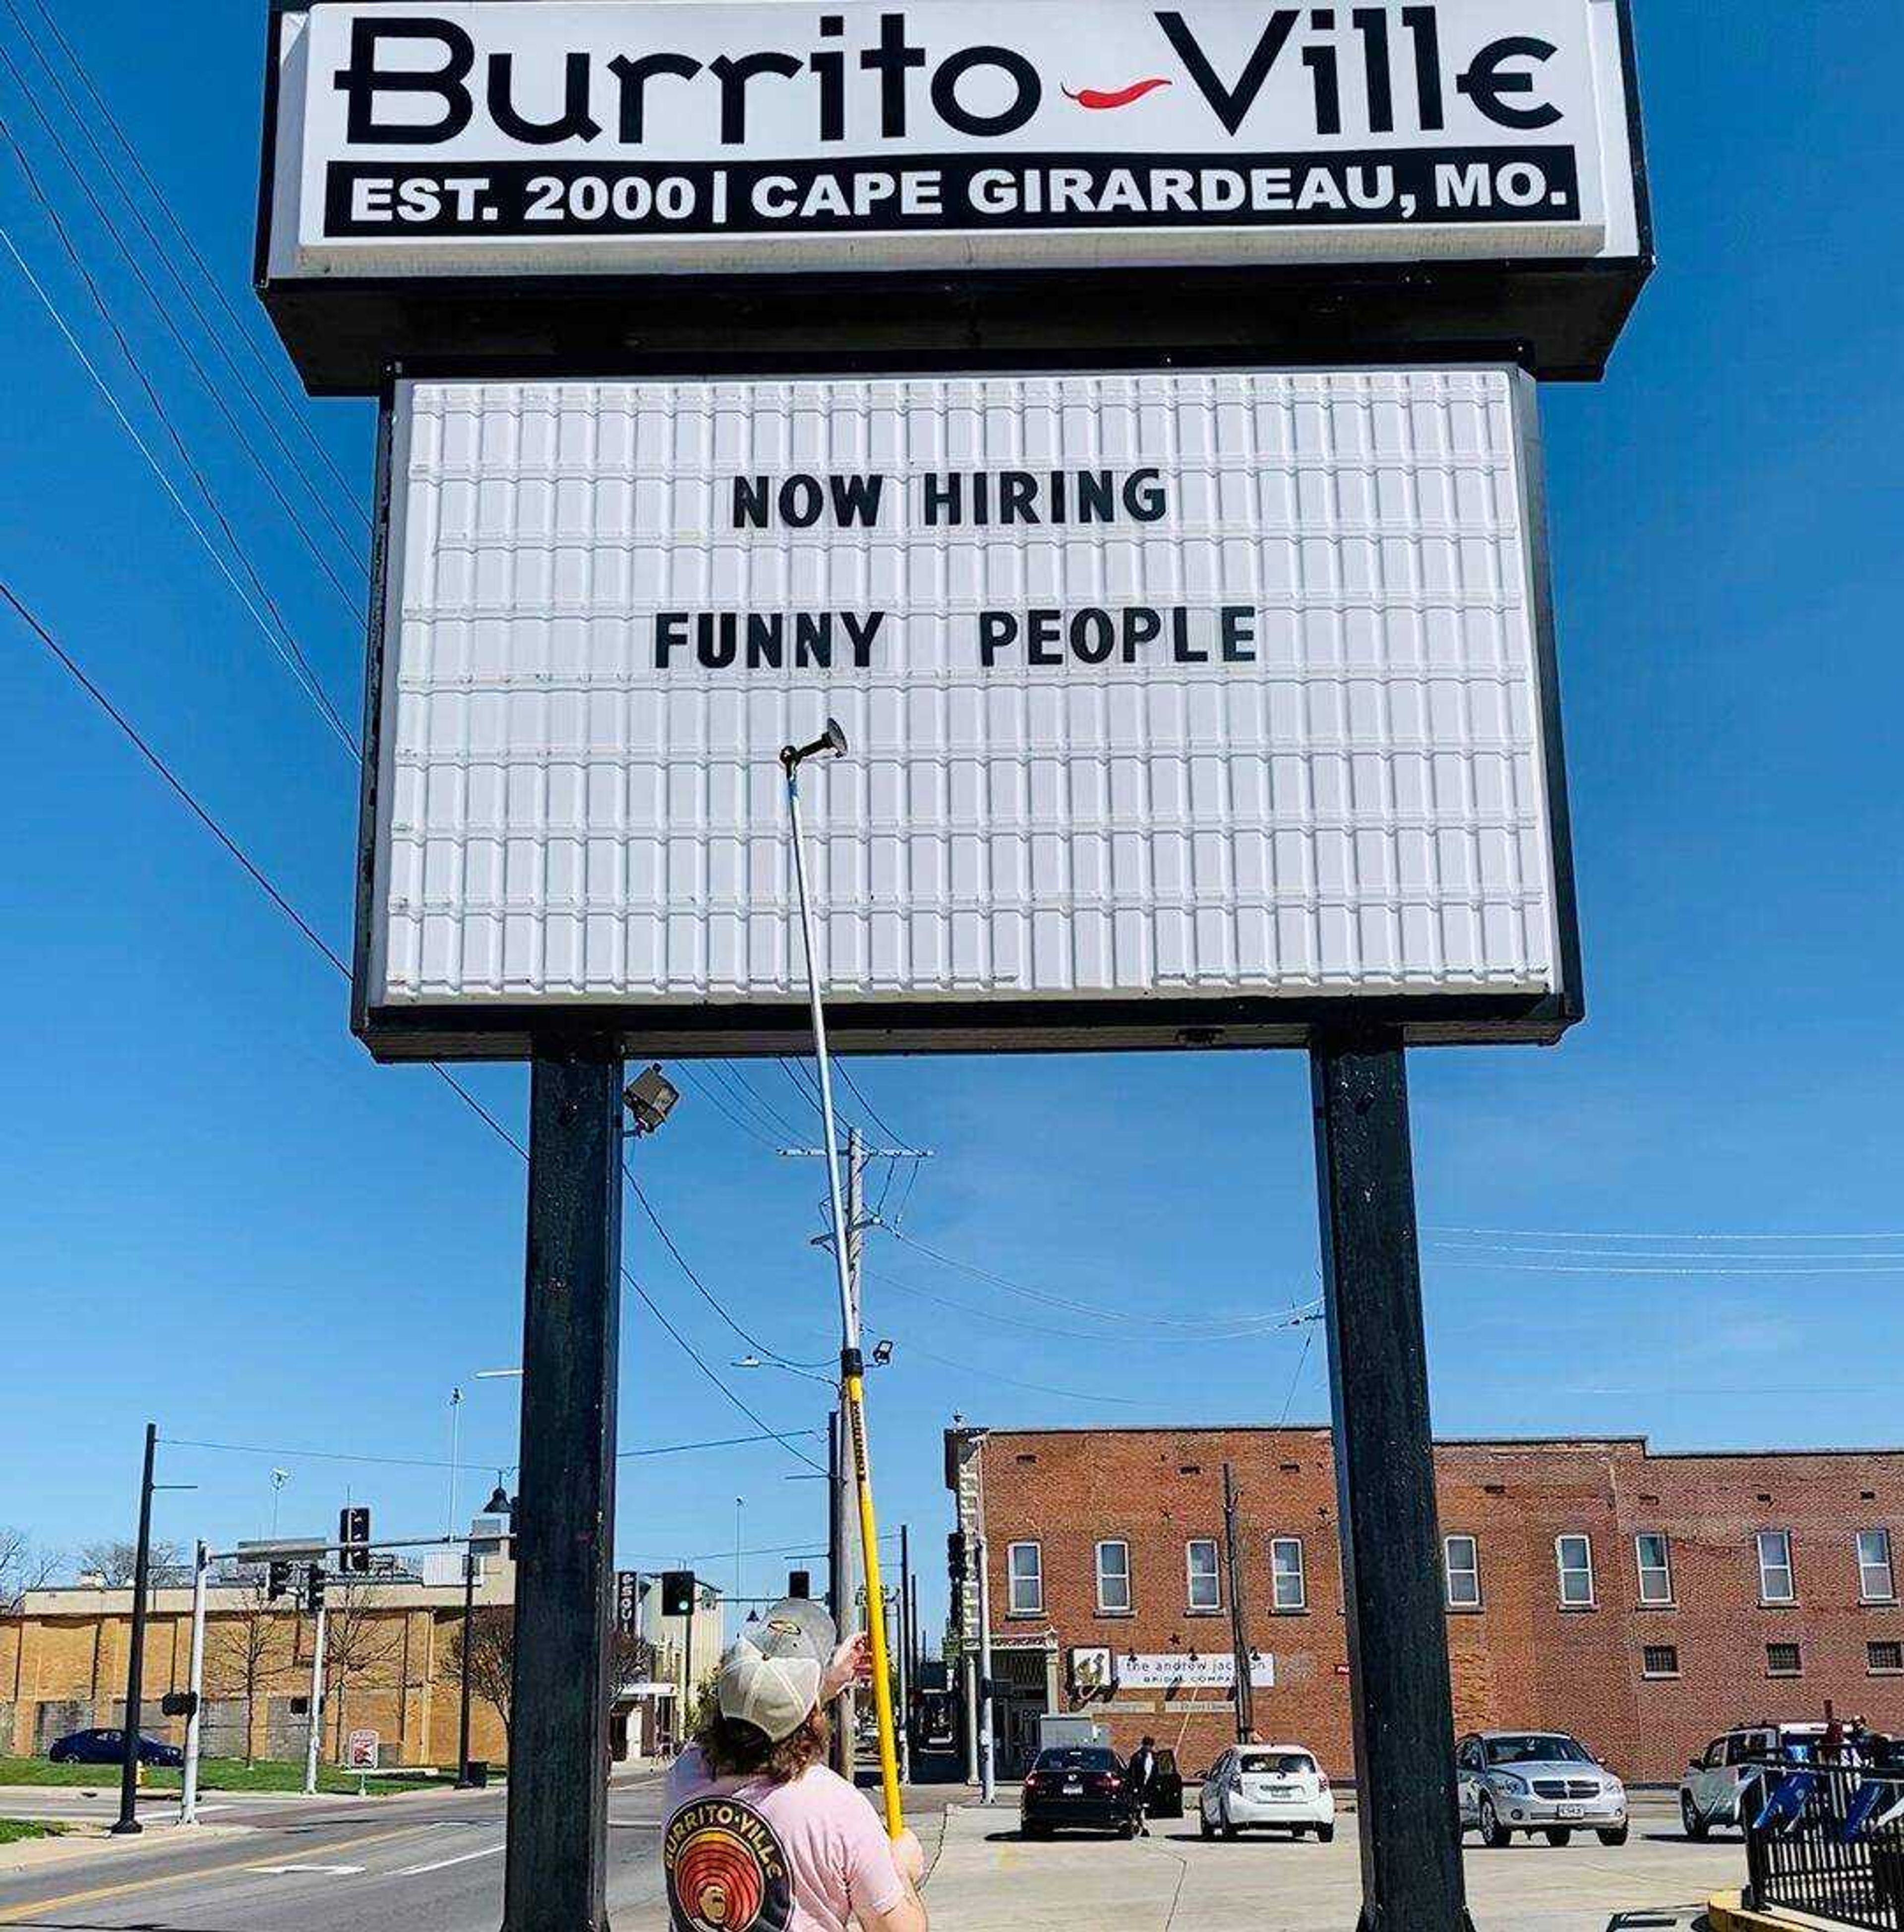 Burritoville, a local restaurant, owned by Southeast alum, Justin Denton, is a business that beat the odds in the midst of the COVID-19 pandemic.